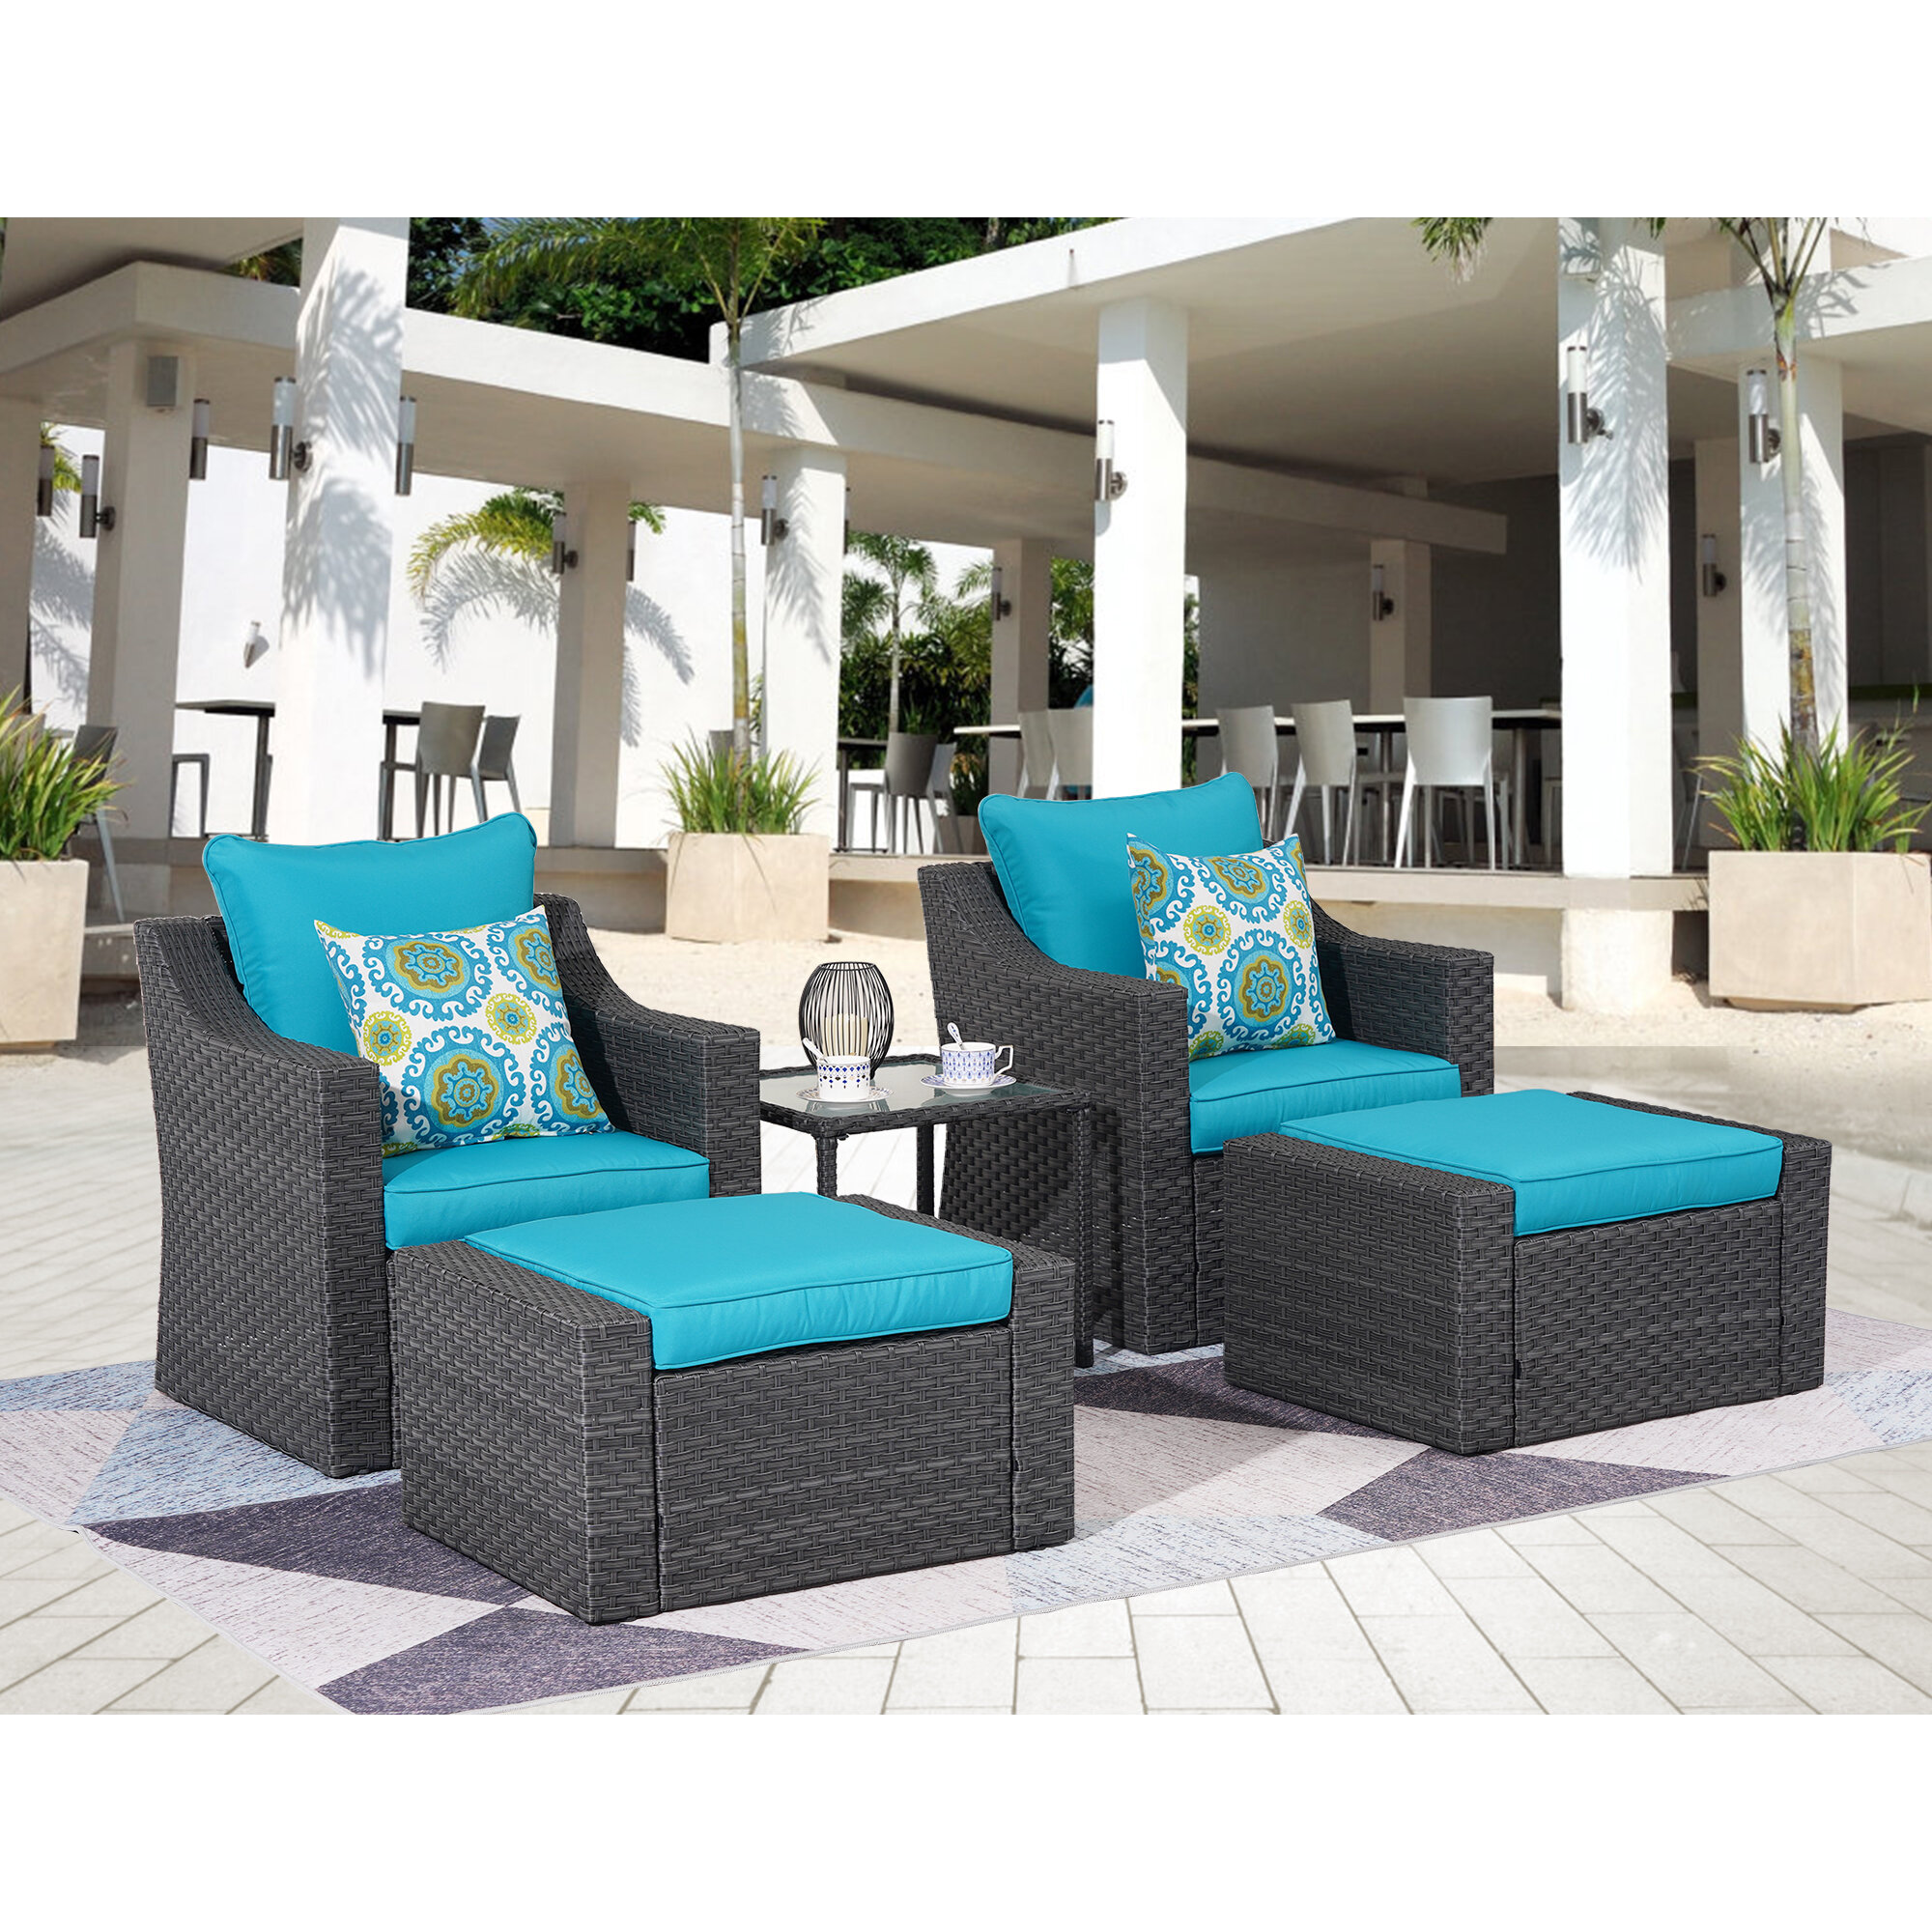 Do everything with my power often jelly wayfair resin patio furniture ...